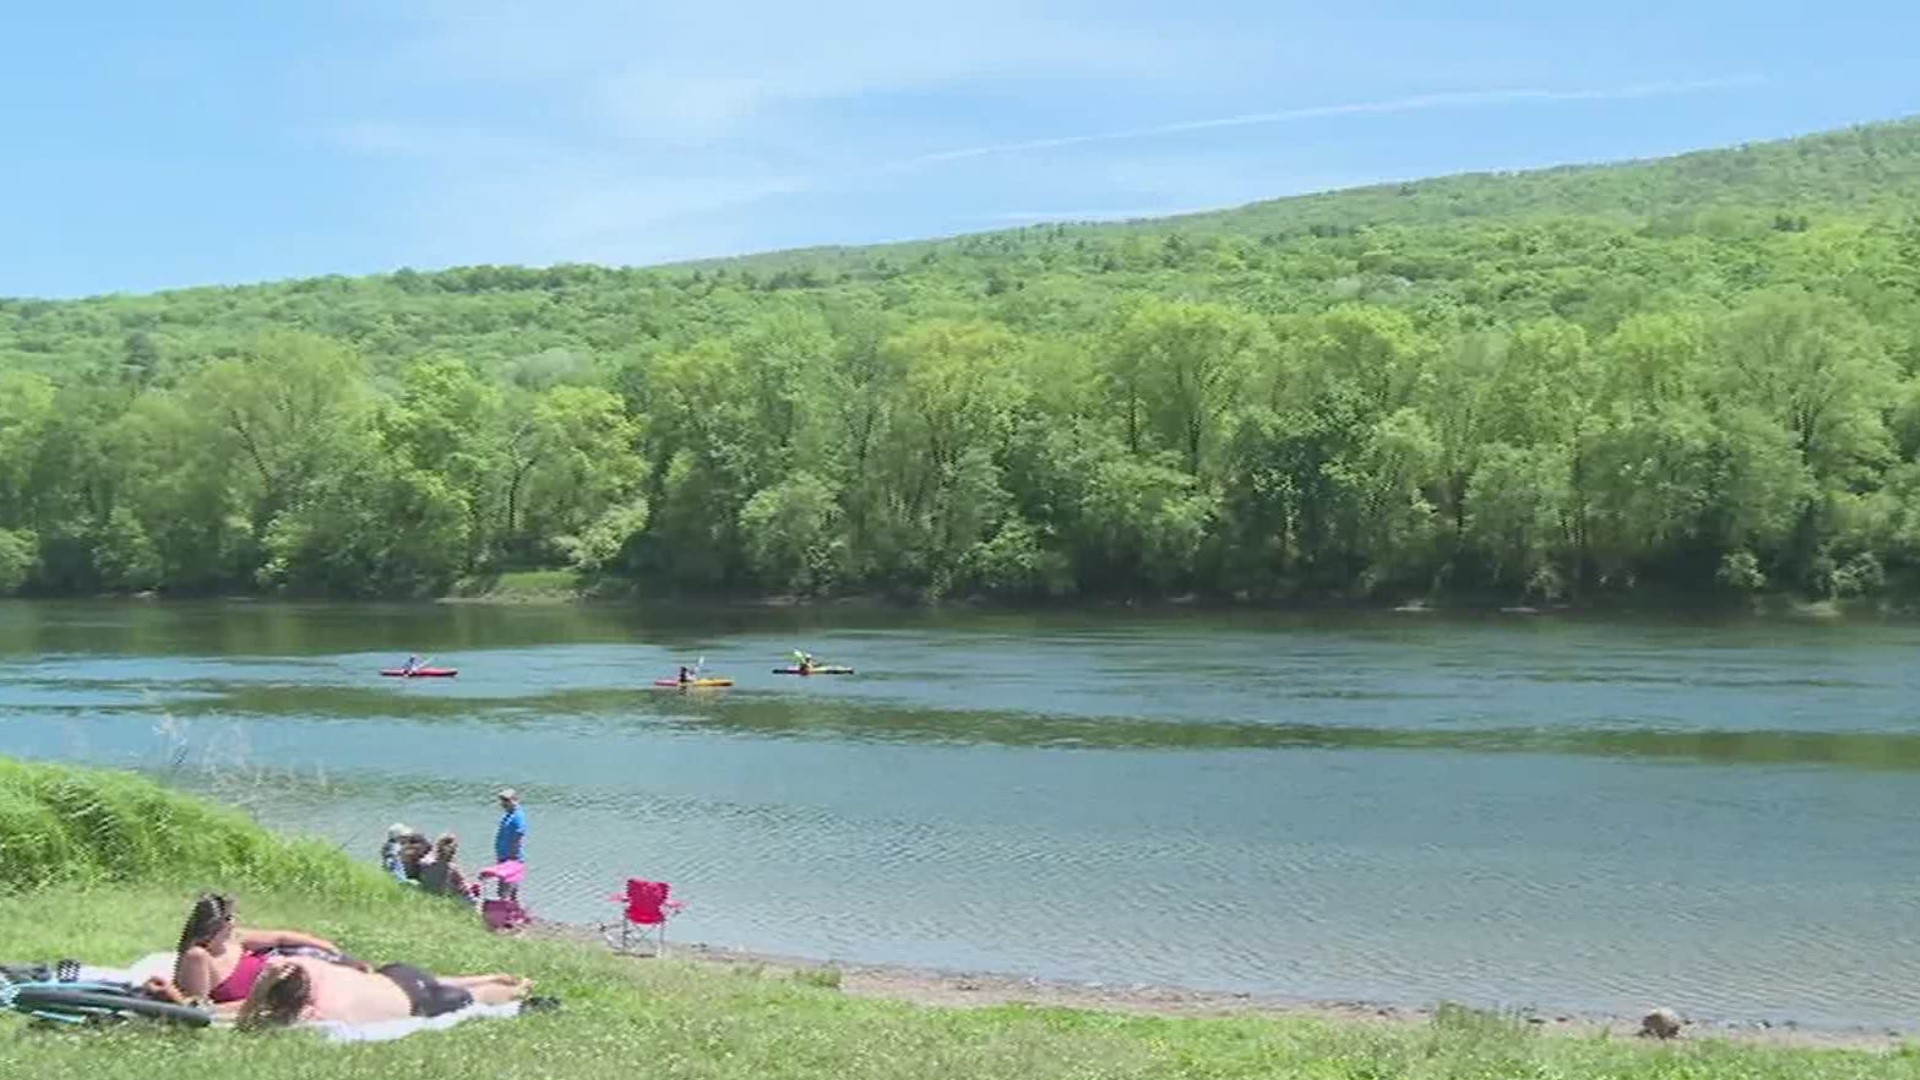 Memorial Day Weekend marks the unofficial kick-off to the summer season but for some counties still in the red phase, it was quieter than normal.